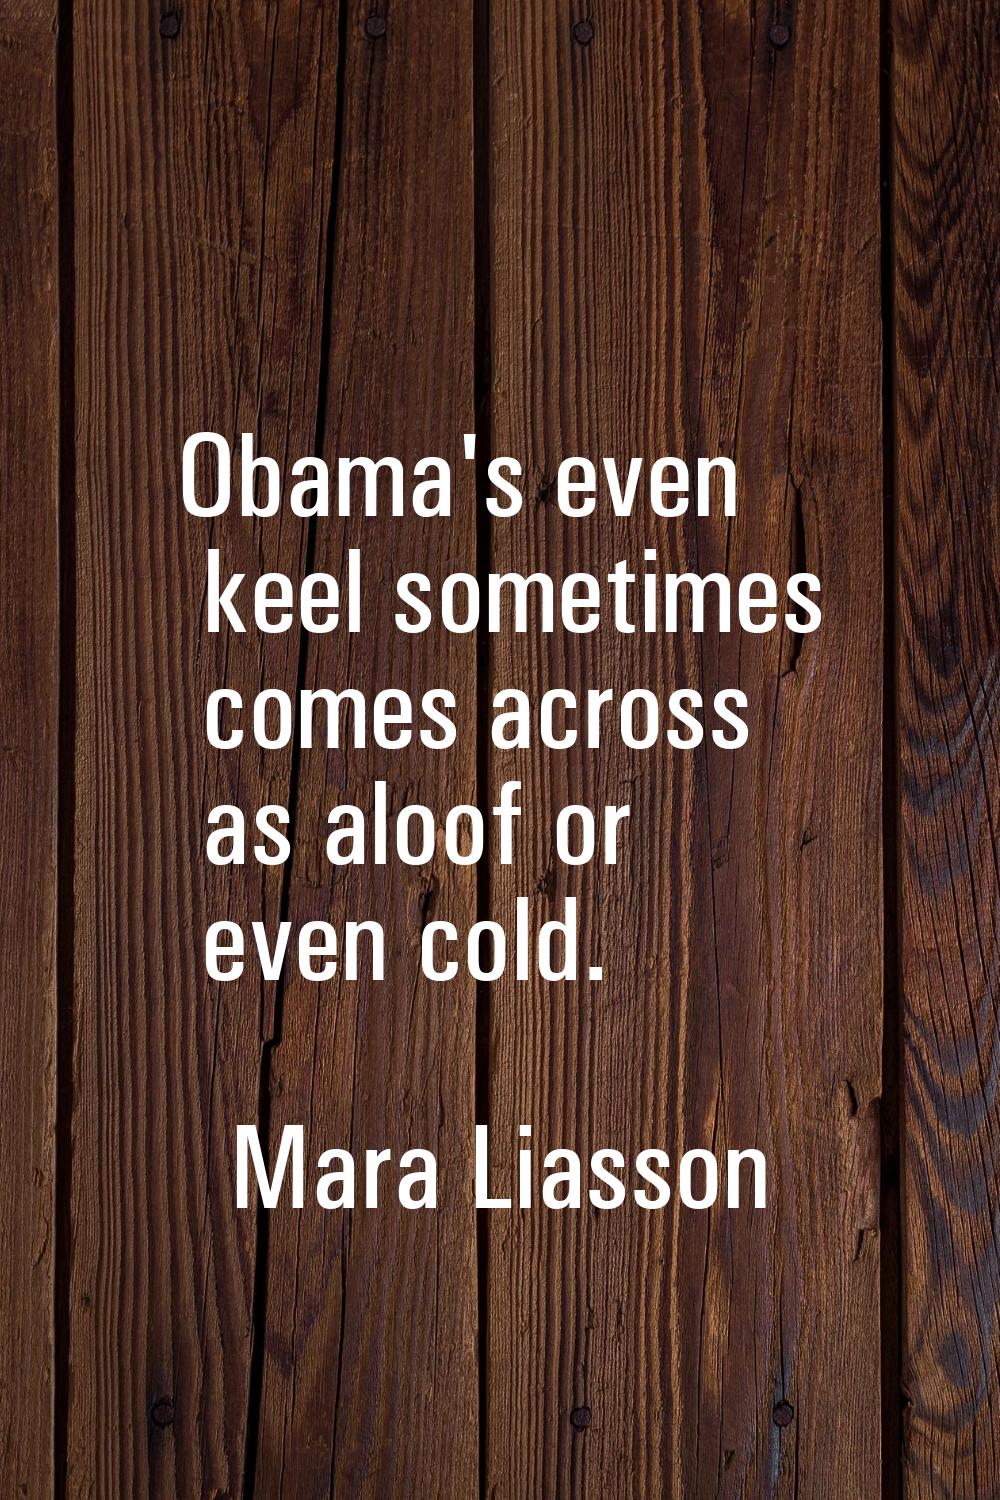 Obama's even keel sometimes comes across as aloof or even cold.